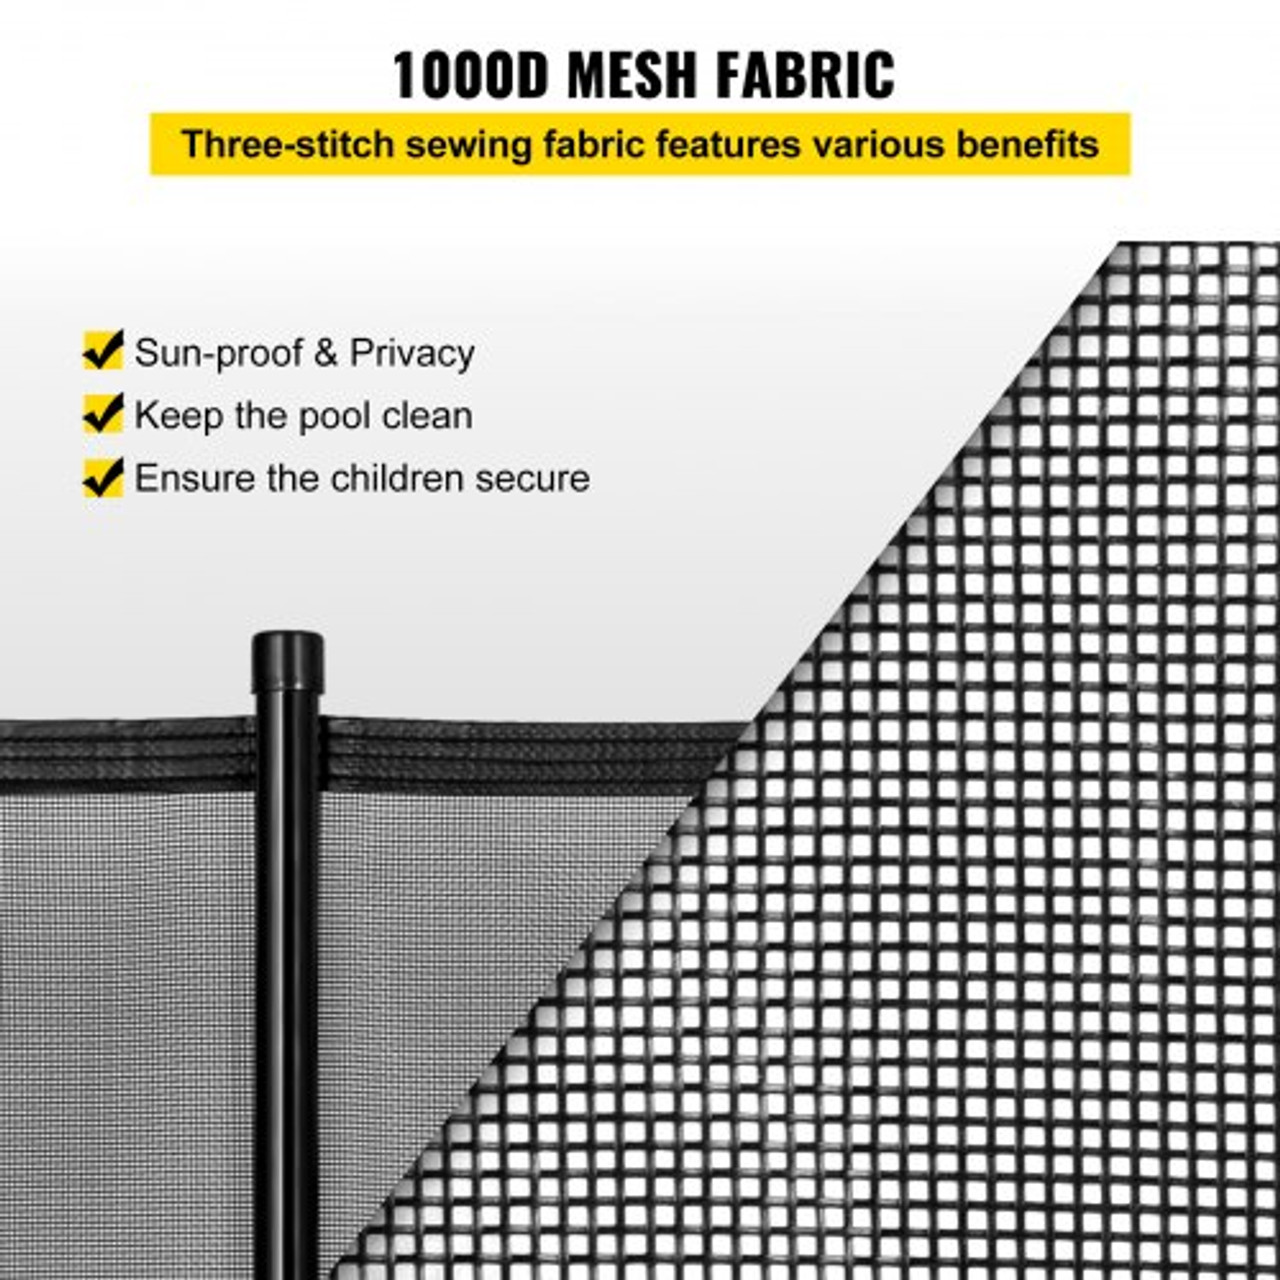 Pool Fence for Inground Pools, 4' x 48' - Pool Fence, Black Mesh Barrier - Removable DIY Pool Fencing, with Section Kit (4' x 48')